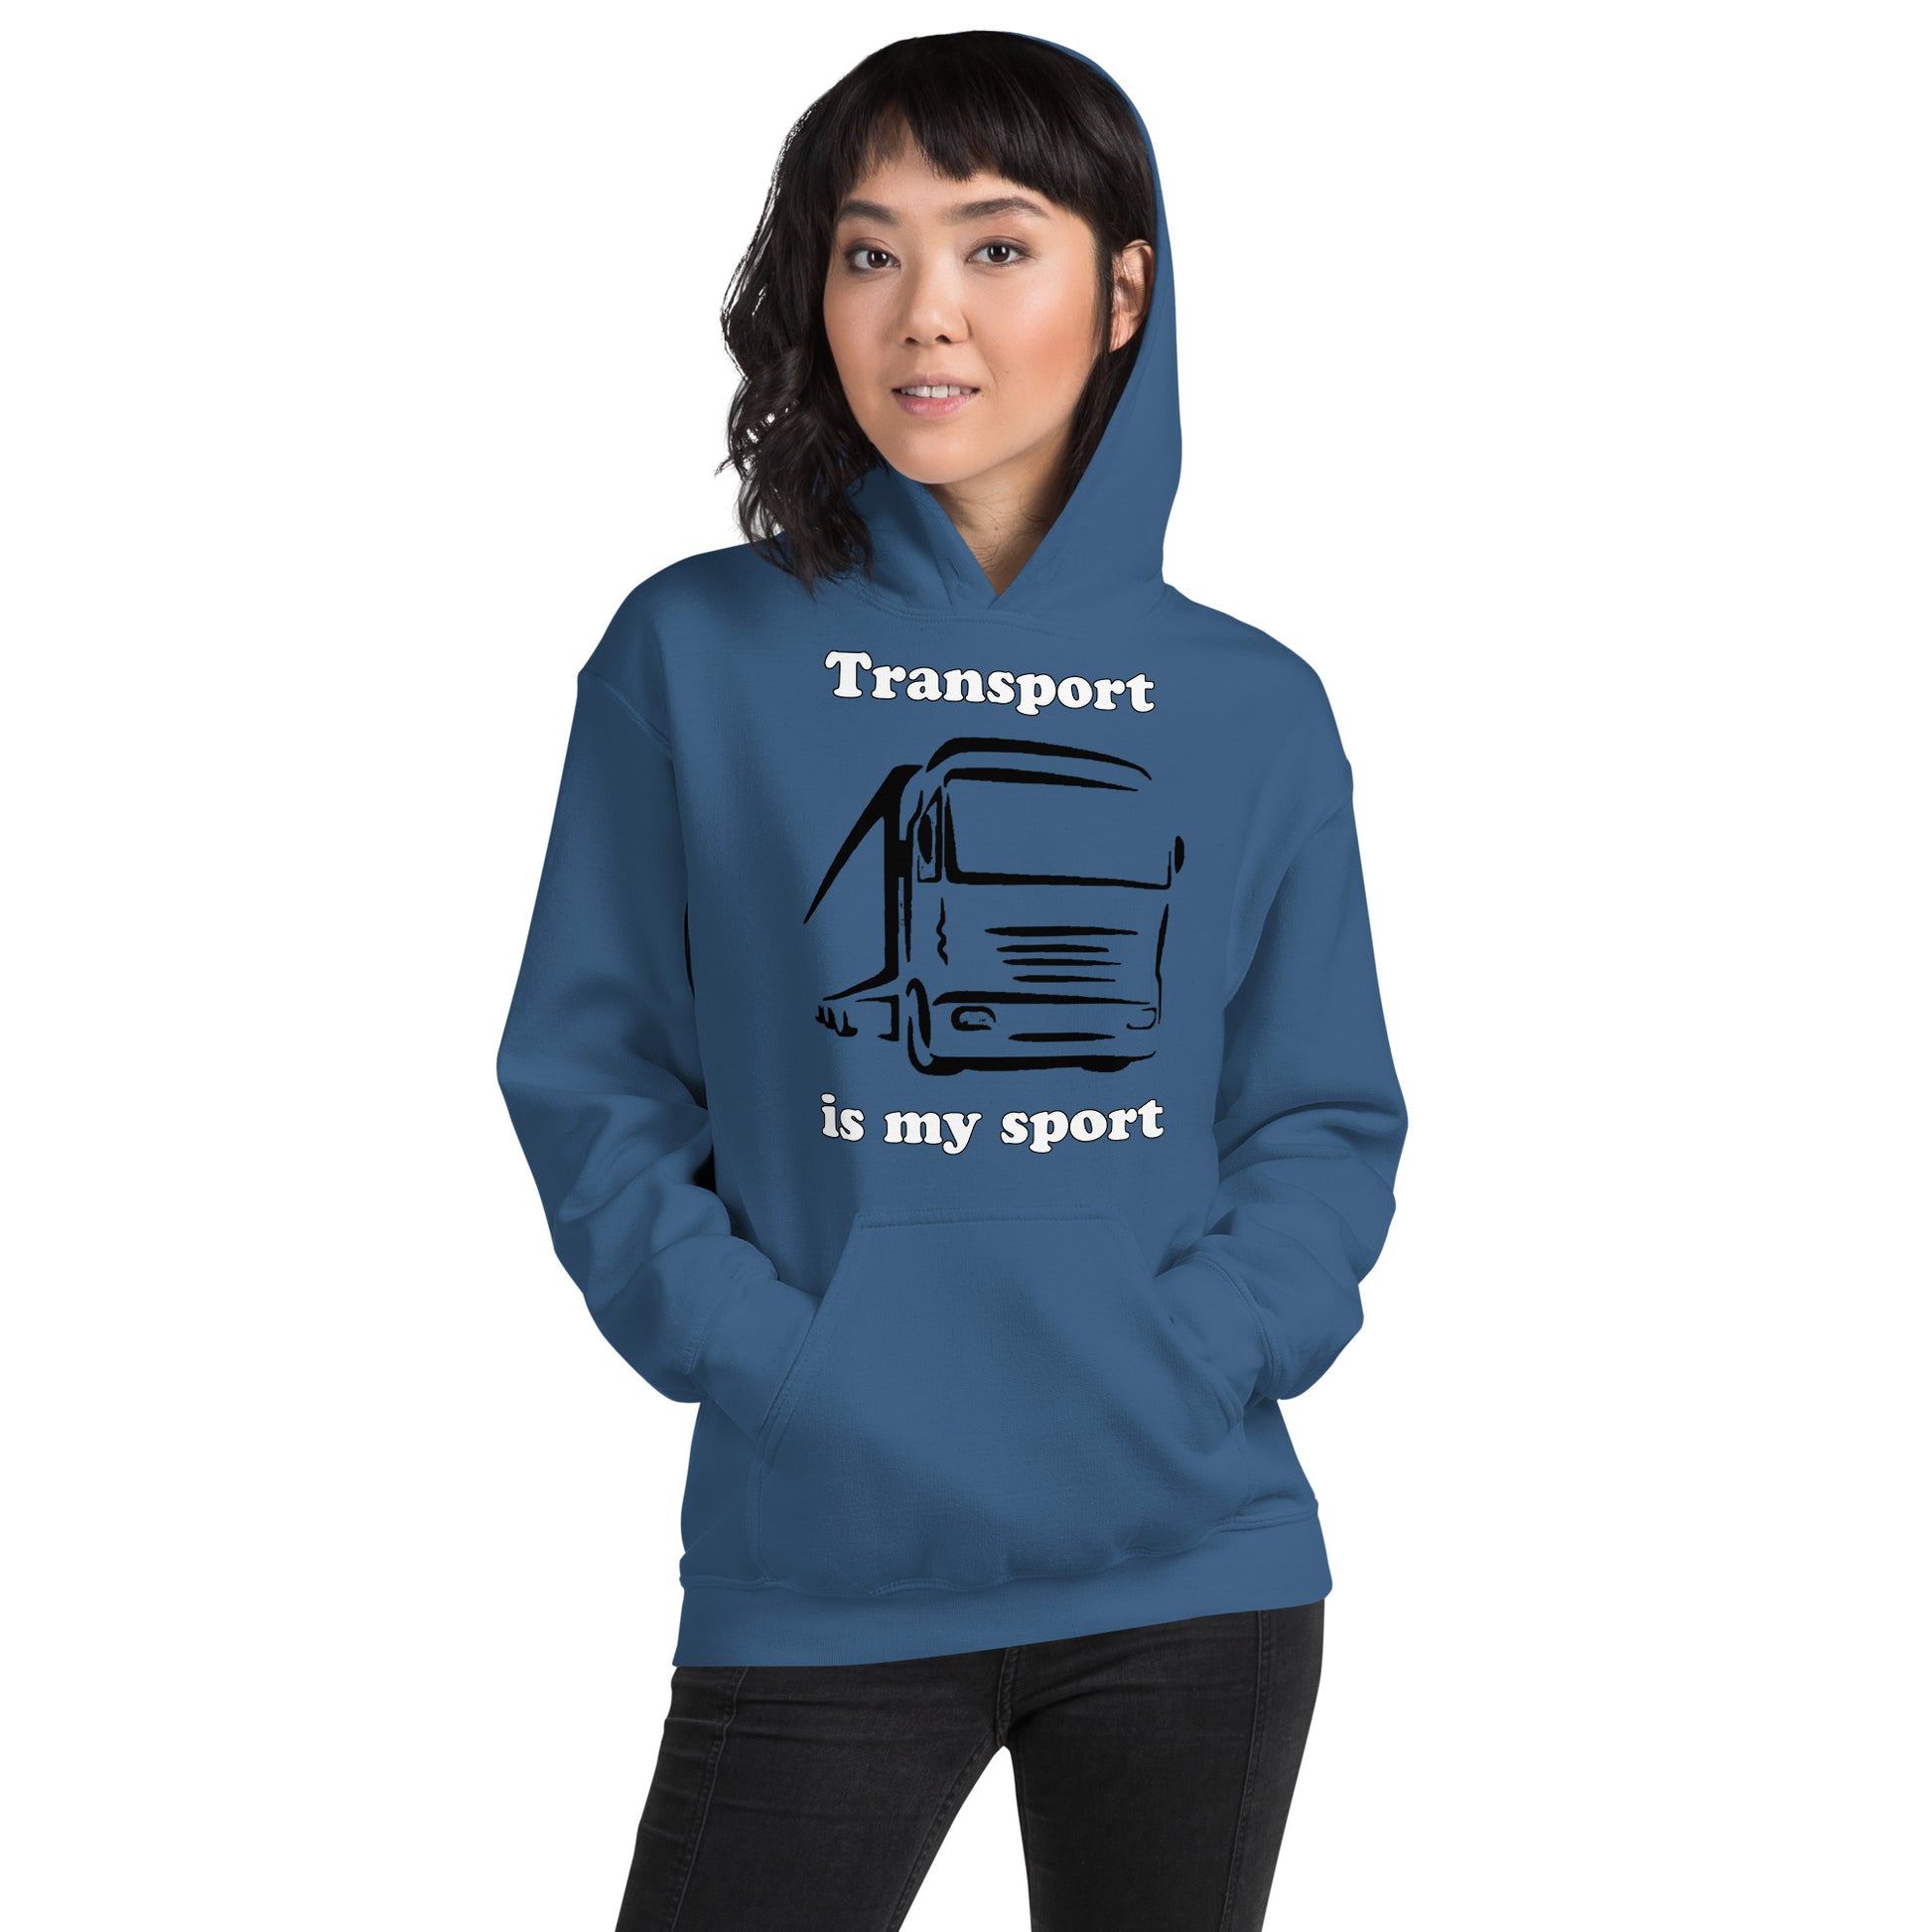 Woman with Indigo blue hoodie with picture of truck and text "Transport is my sport"